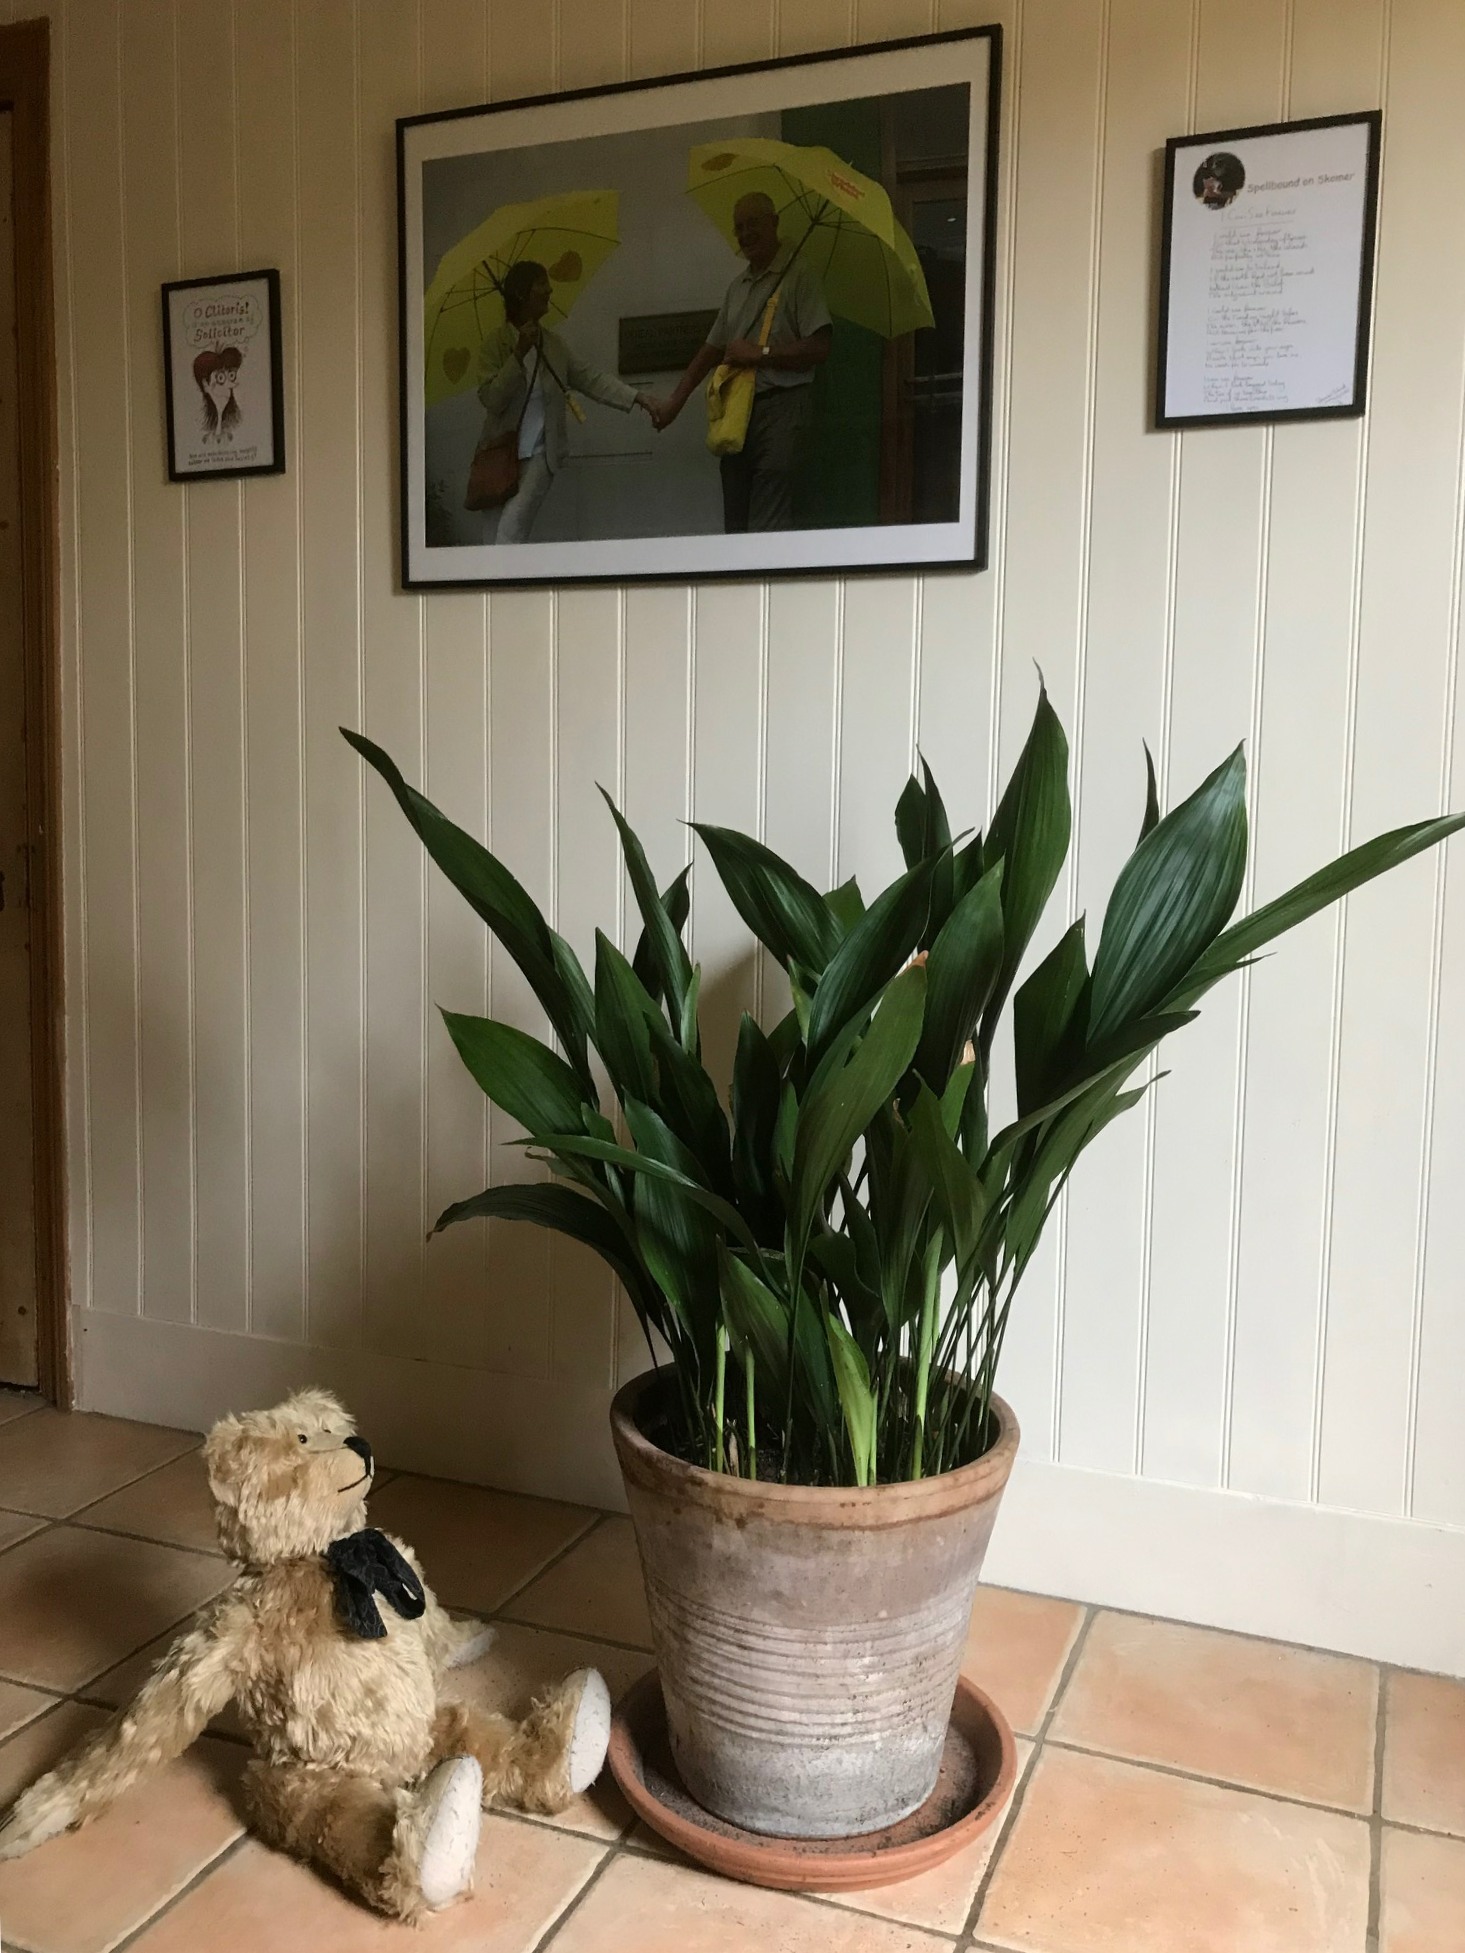 Aspidistra: That's more like it! Not so gloomy here - see how it shines, Bobby!